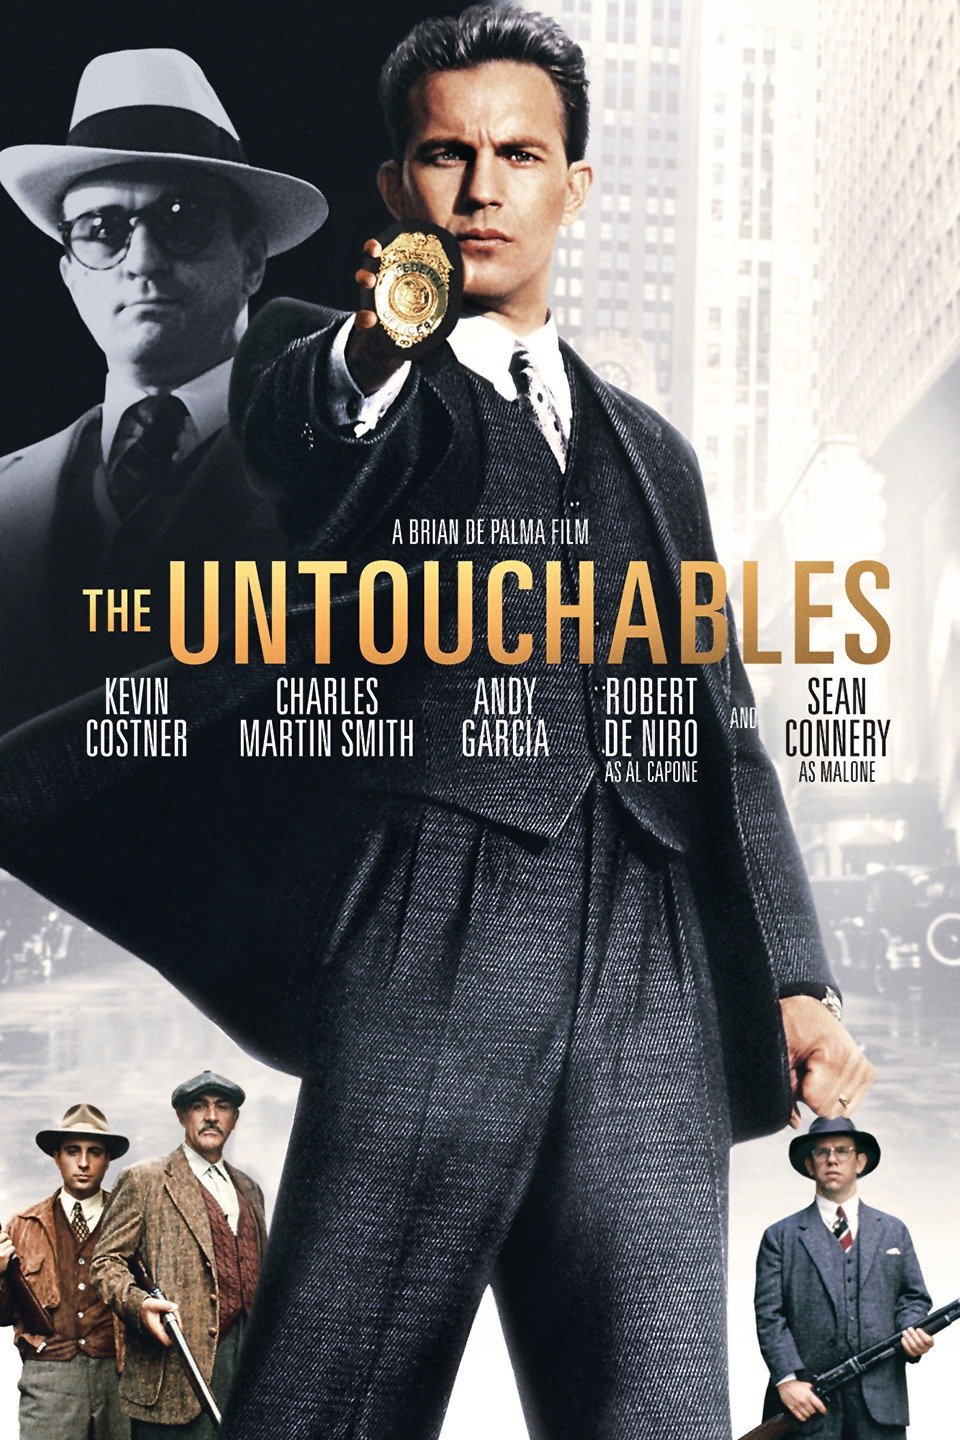 The Complete Series The Untouchables for sale online DVD 